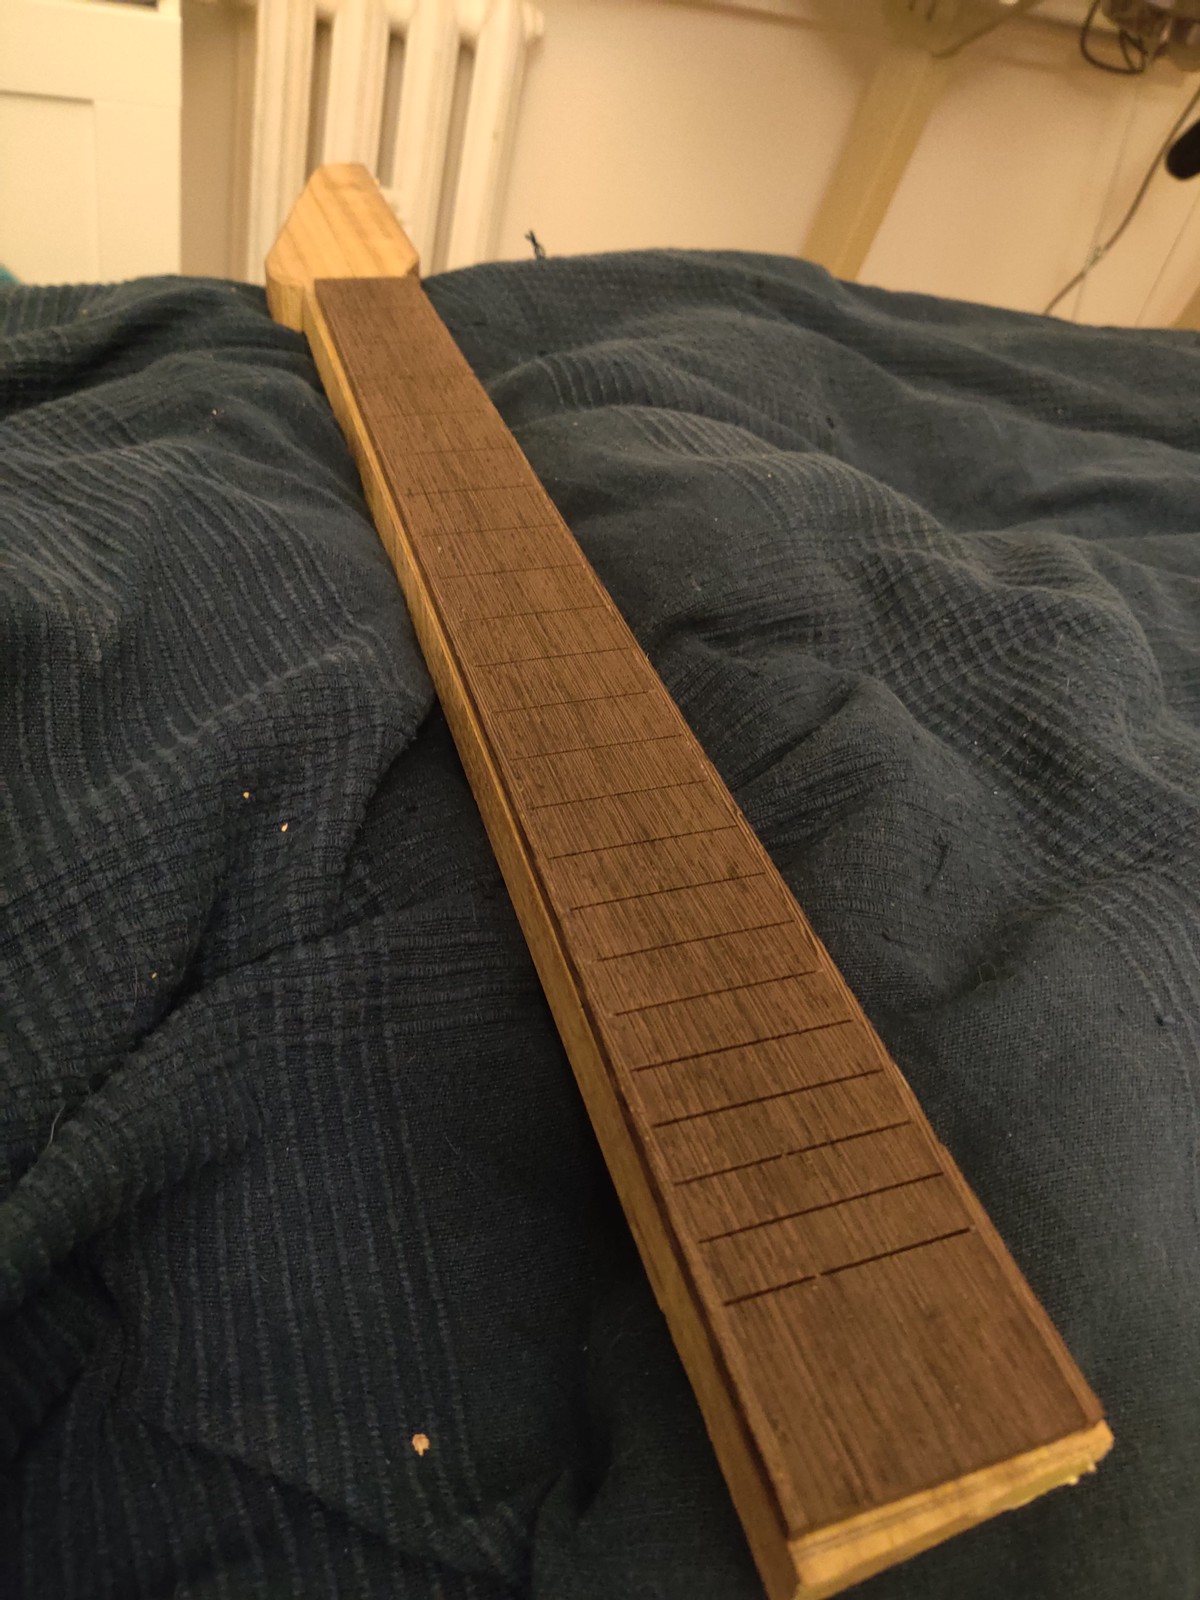 A roughly cut guitar neck with fretboard on top